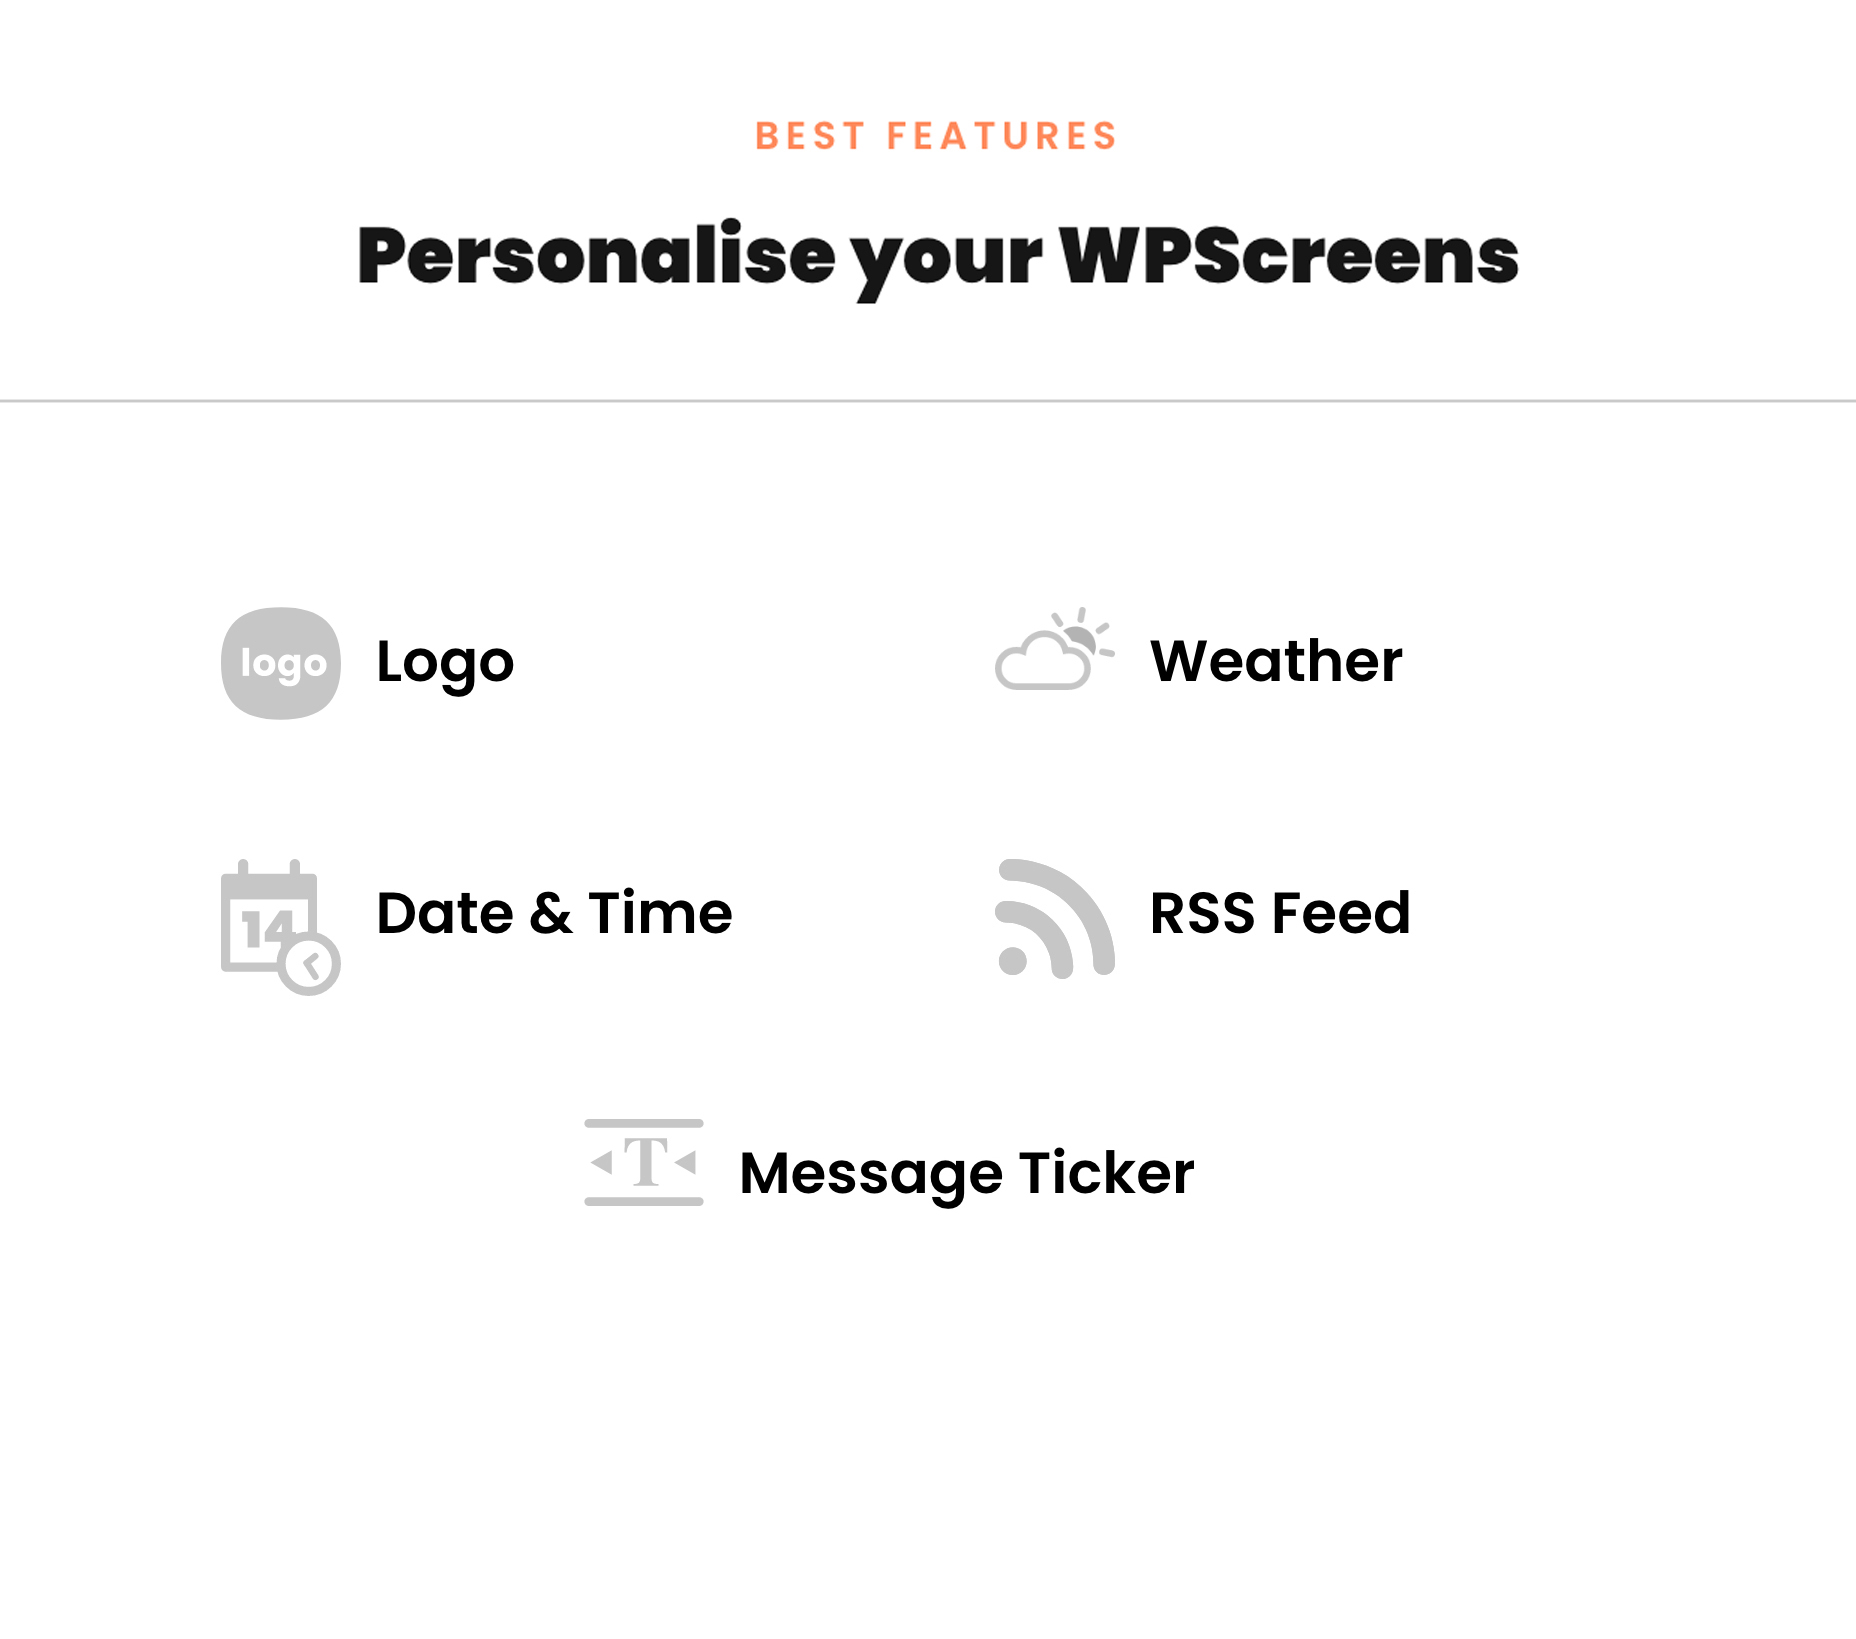 Personalize your WPScreens